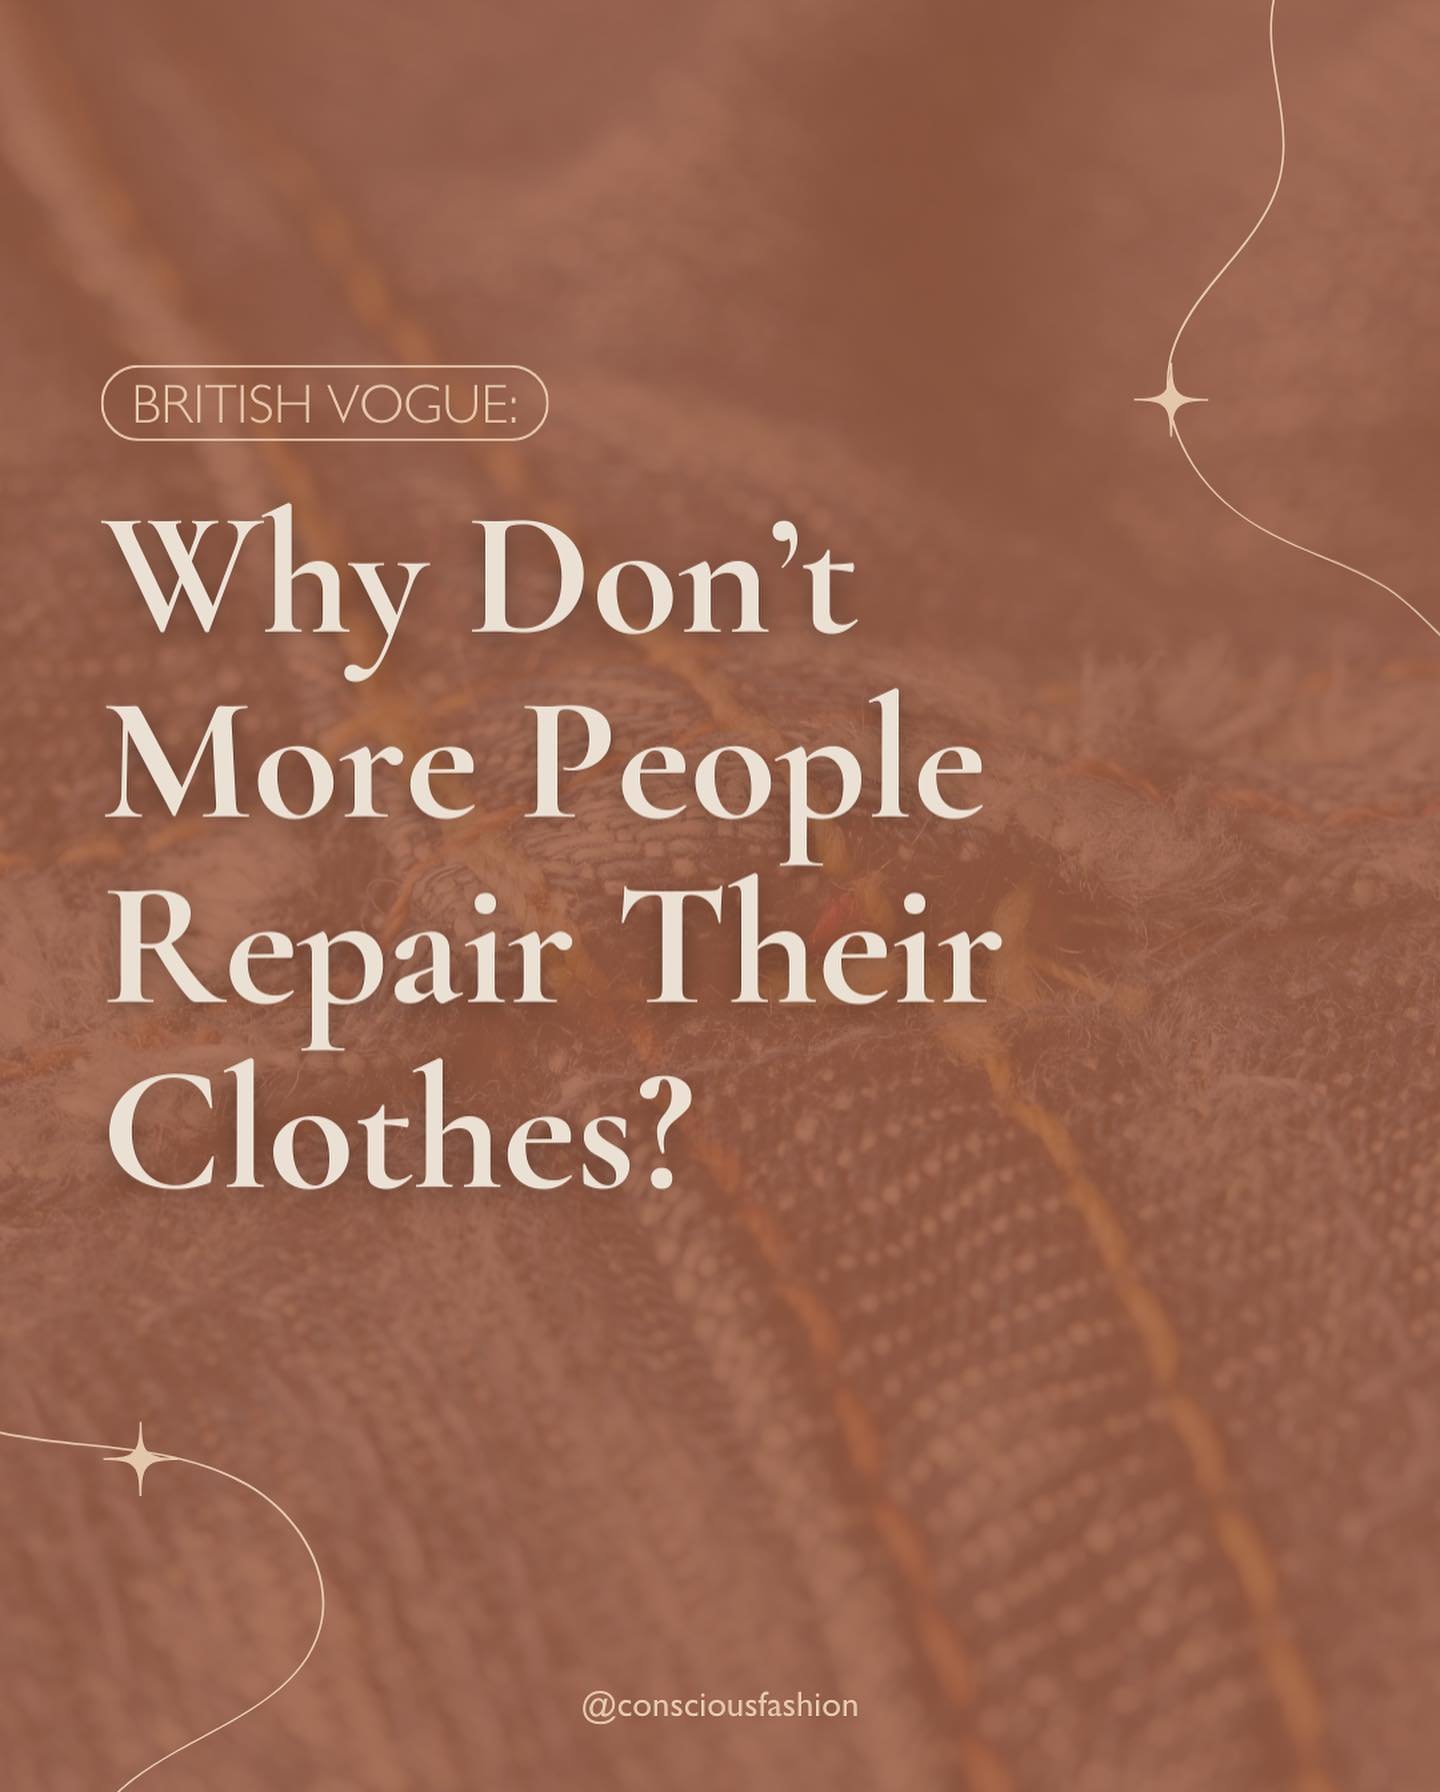 ✨&rdquo;Repairing our clothes is essential in order to increase the lifespan of our garments, and to stop them from ending up in landfill.&rdquo;⁠
⁠
🔗 Check out the full article on this topic by Emily Chan for British Vogue via the link in bio.⁠
⁠
?